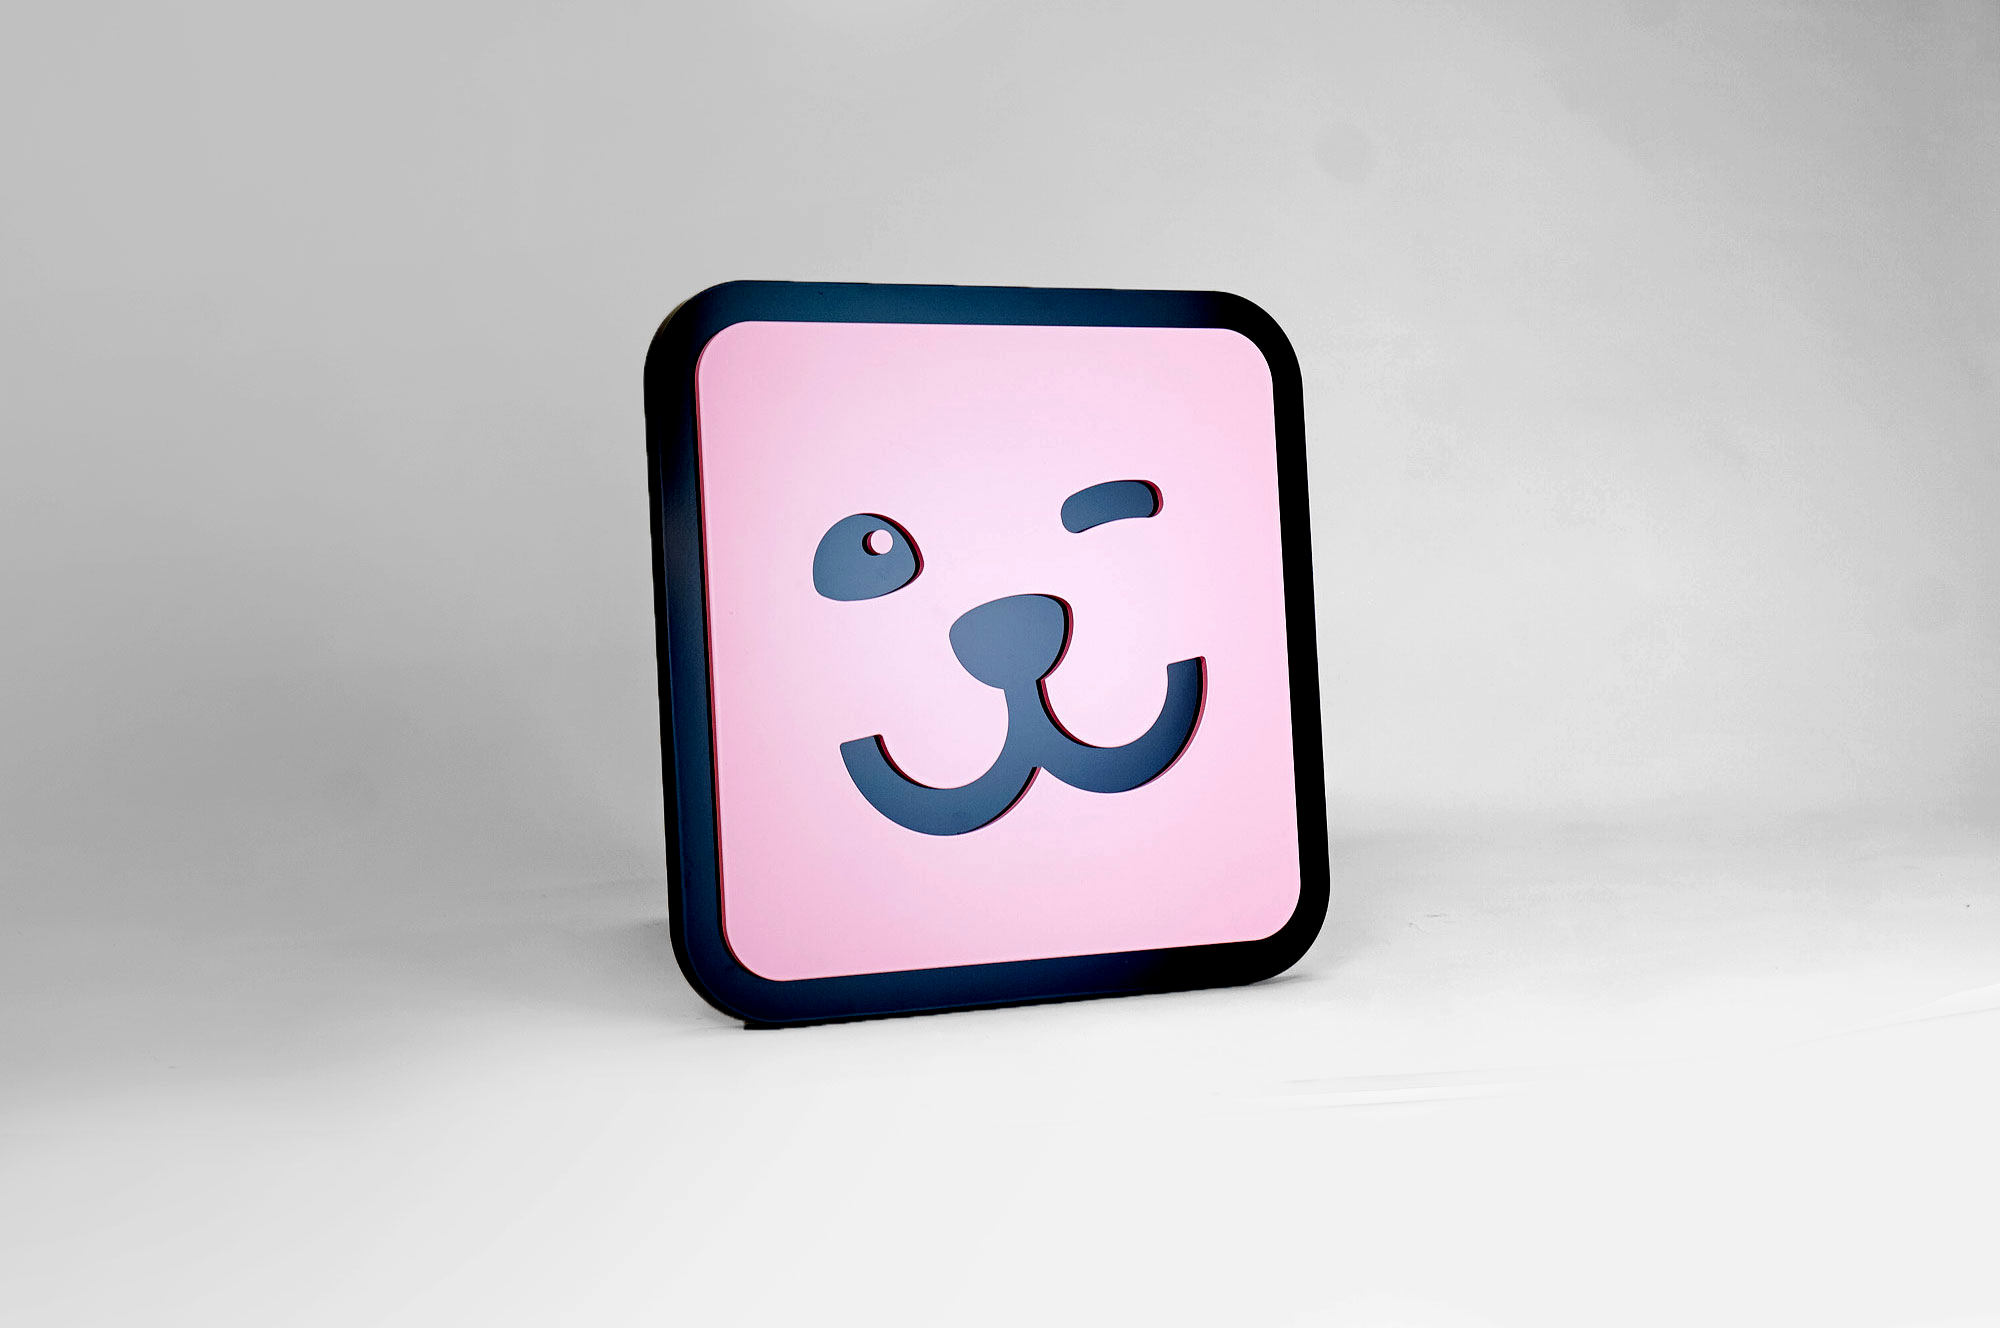 Dimensional pink app icon sign for Pawp, personalized platform to manage your pet's life and discover curated products and services.